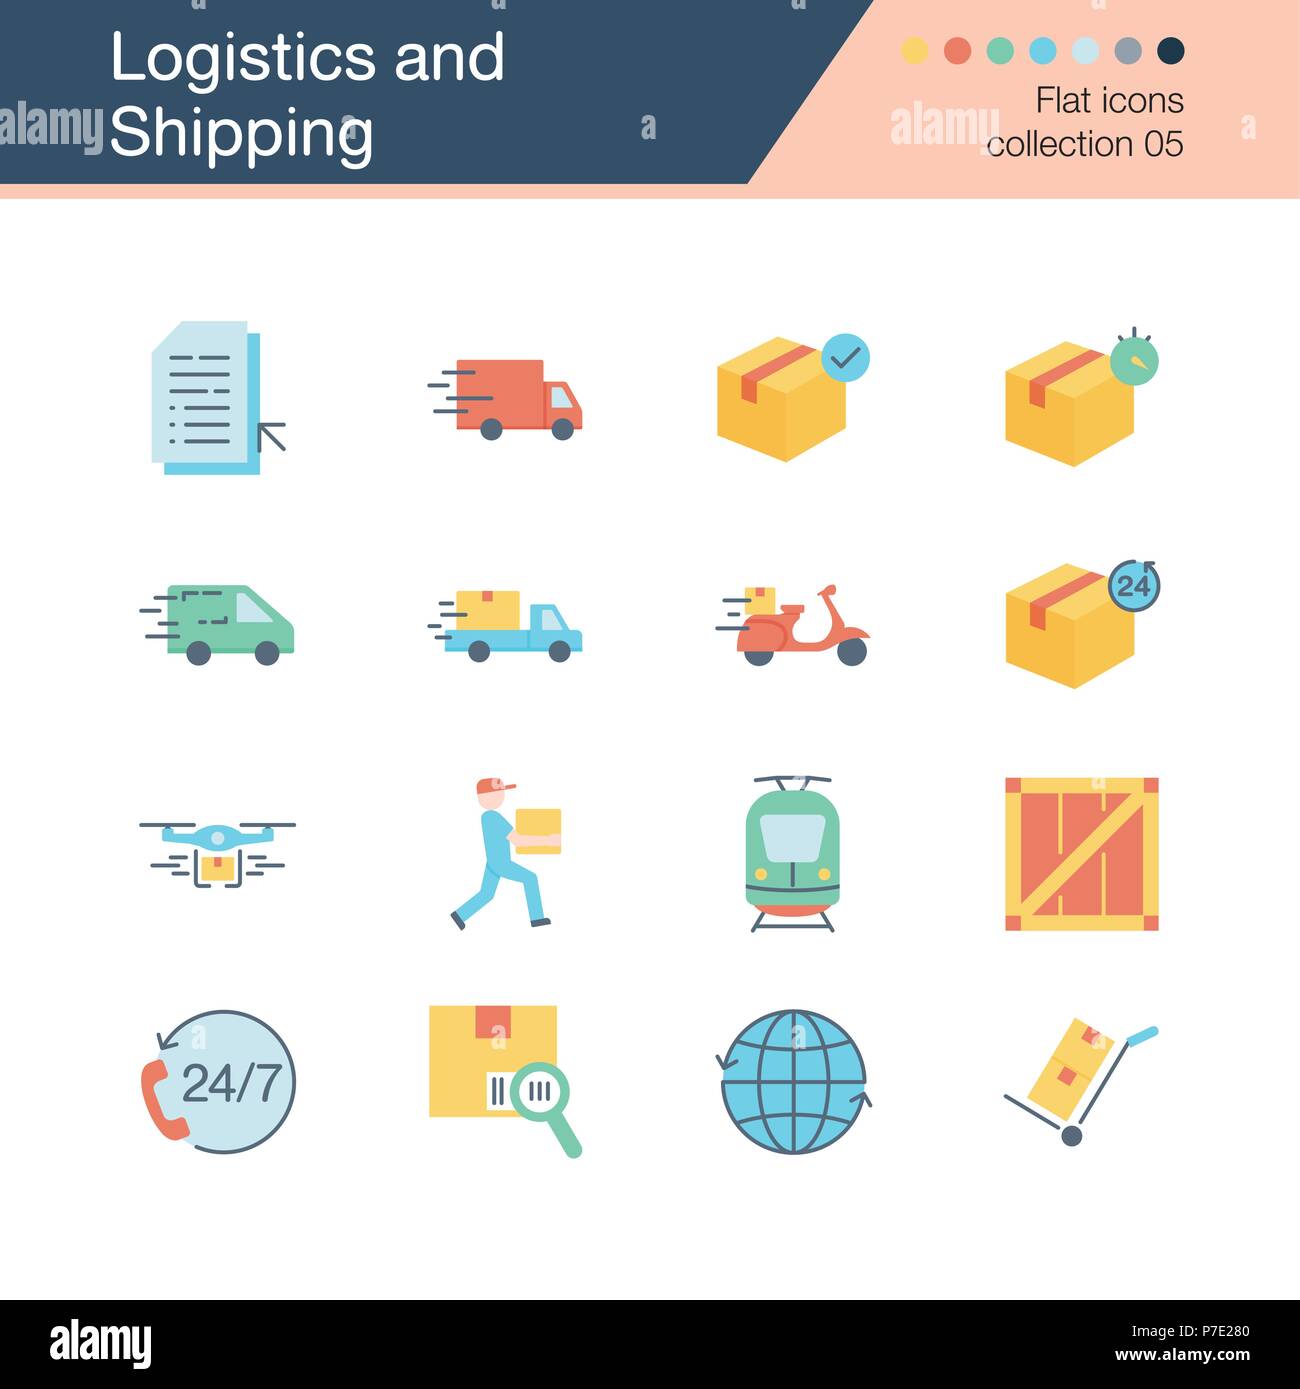 Logistics and Shipping icons. Flat design collection 5. For presentation, graphic design, mobile application, web design, infographics. Vector illustr Stock Vector